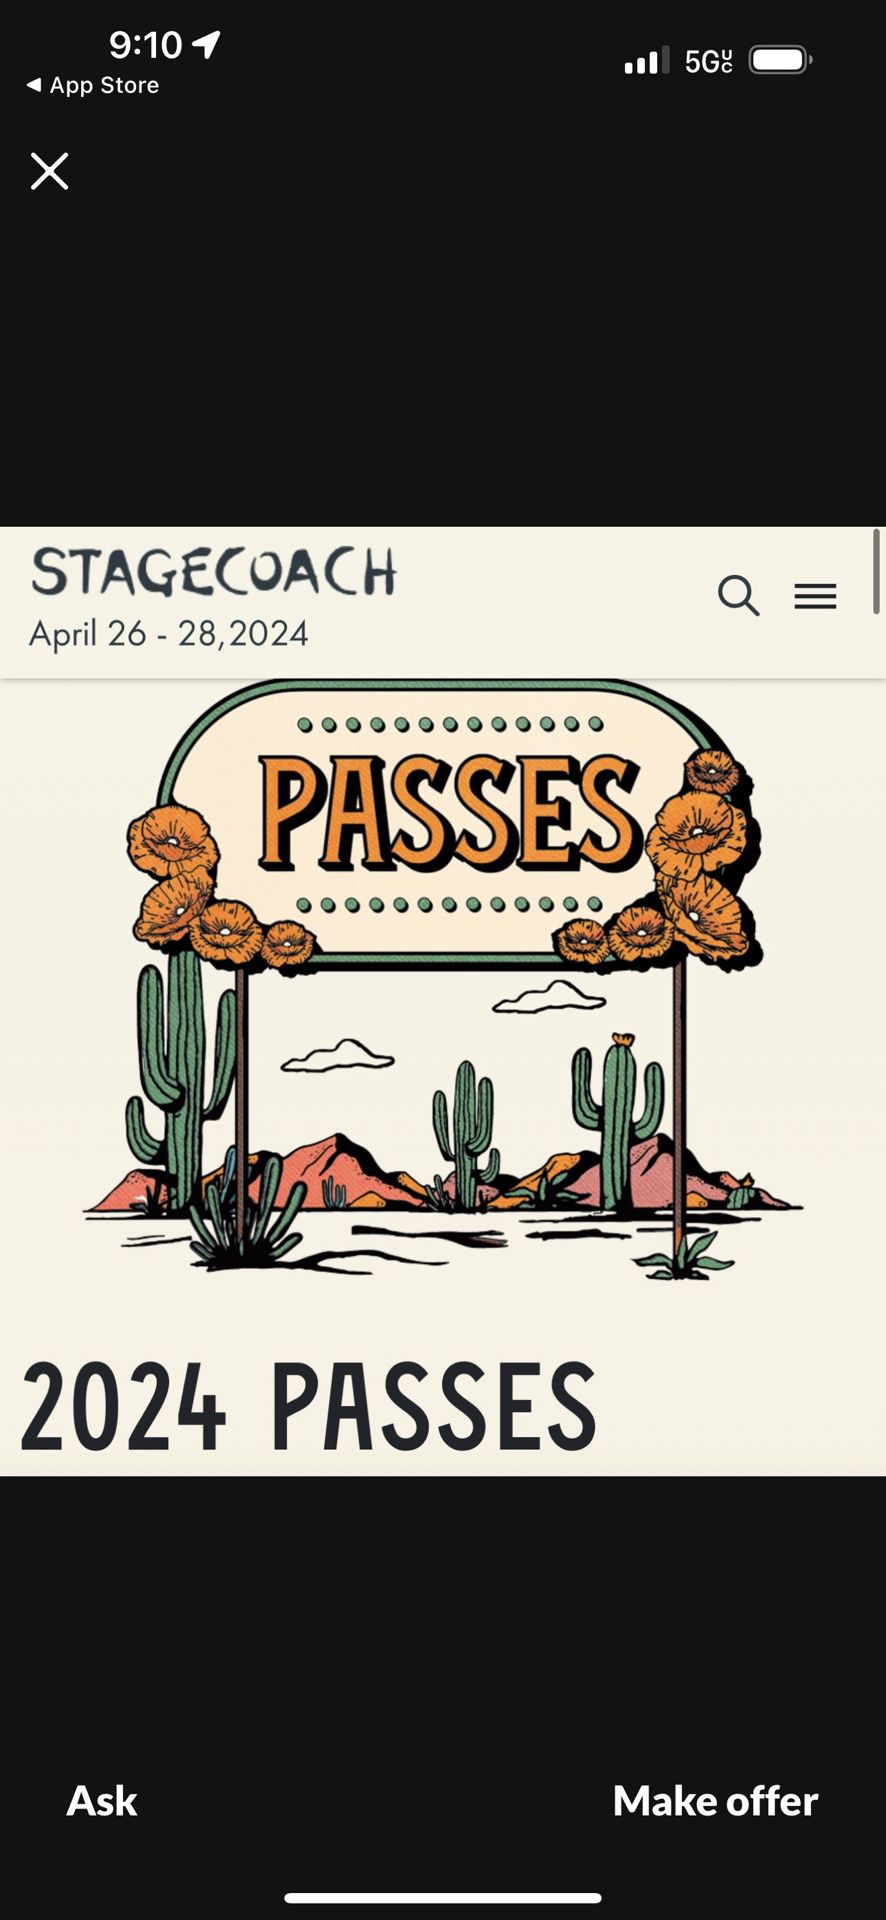 2 Stagecoach Wristbands Needed Sunday Only